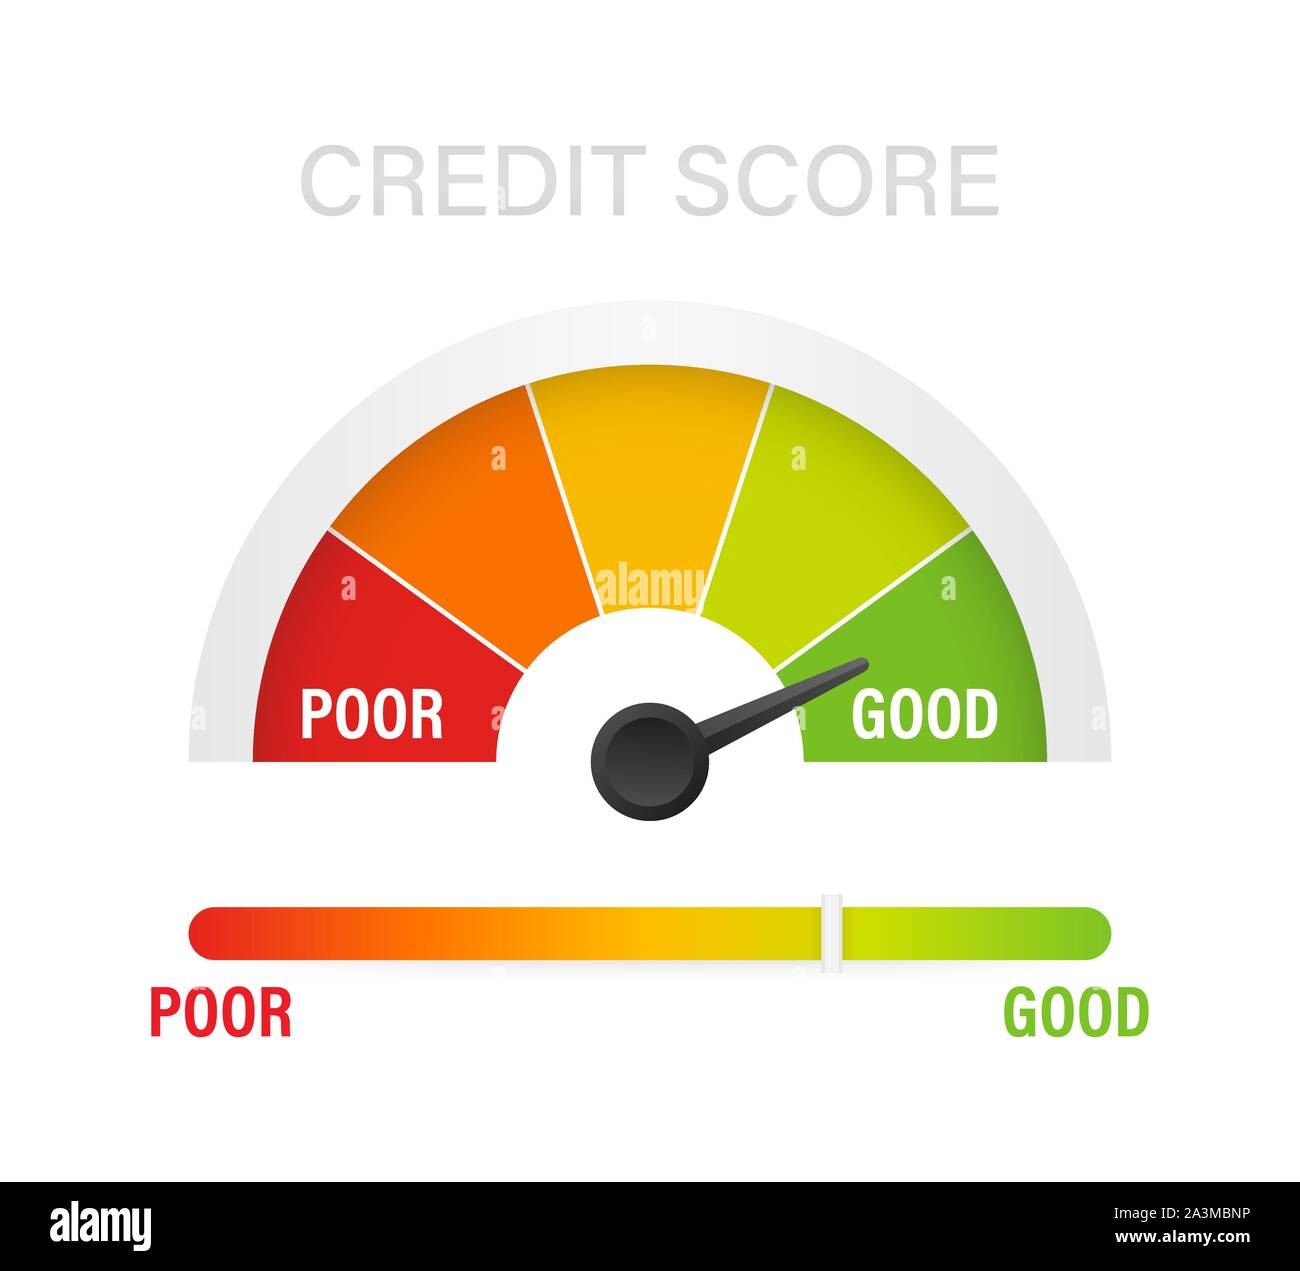 Credit score scale showing good value. Vector stock illustration. Stock Vector